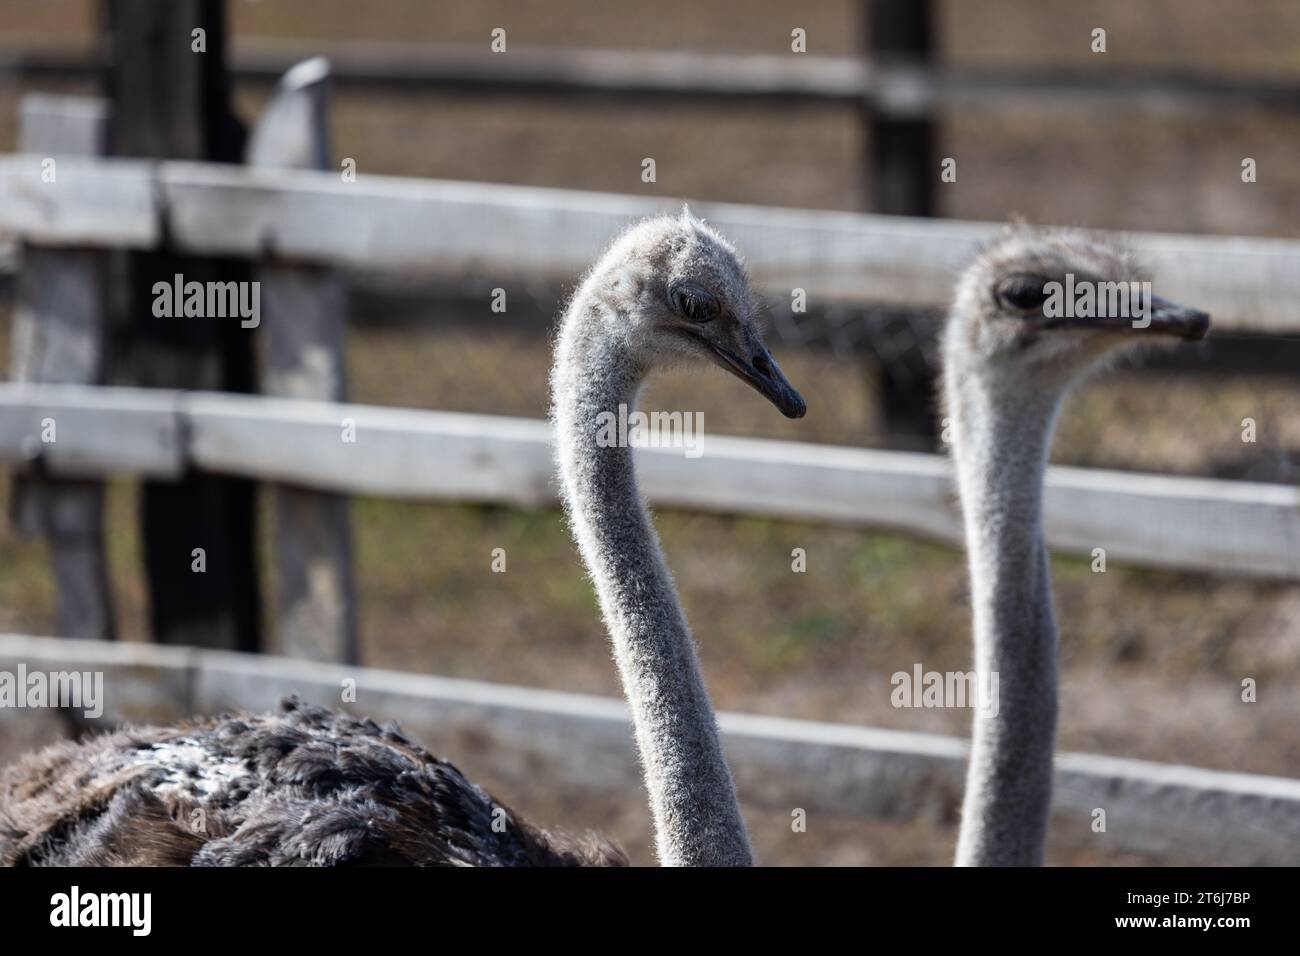 Each ostrich's visage is a study in unique character, with large, soulful eyes that seem to reflect the world around them. Their long, graceful necks Stock Photo